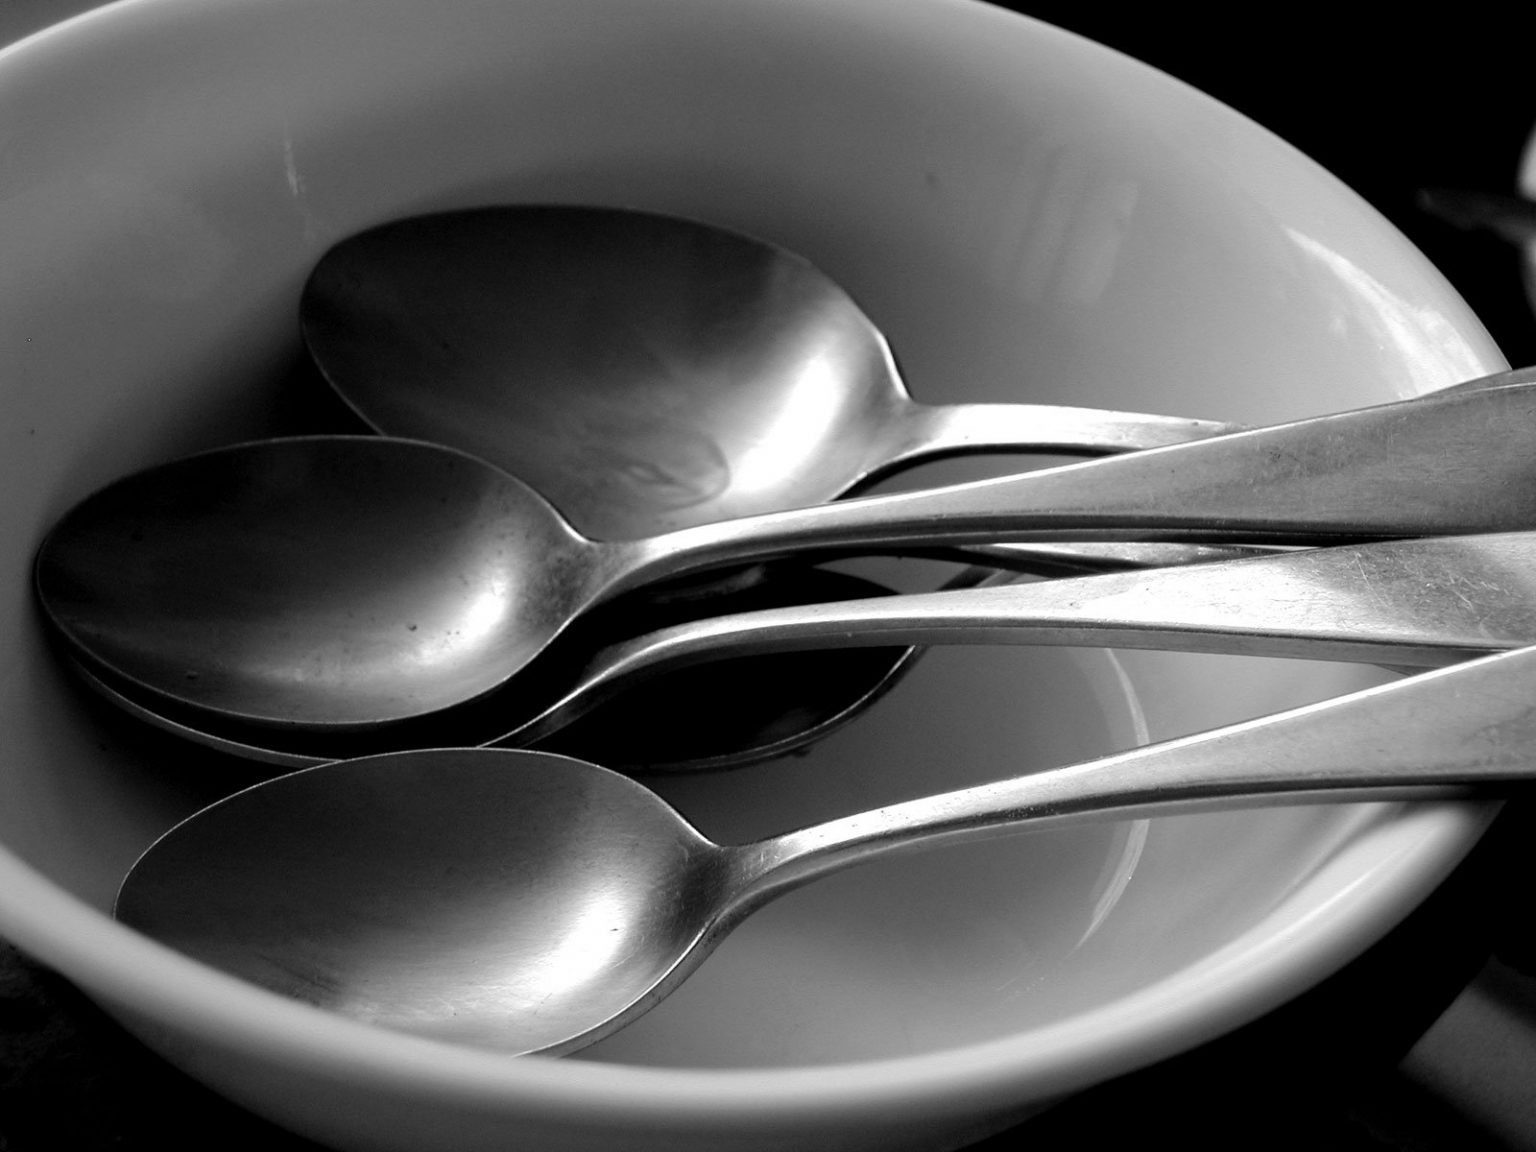 Guide-to-Spoons-1536x1152